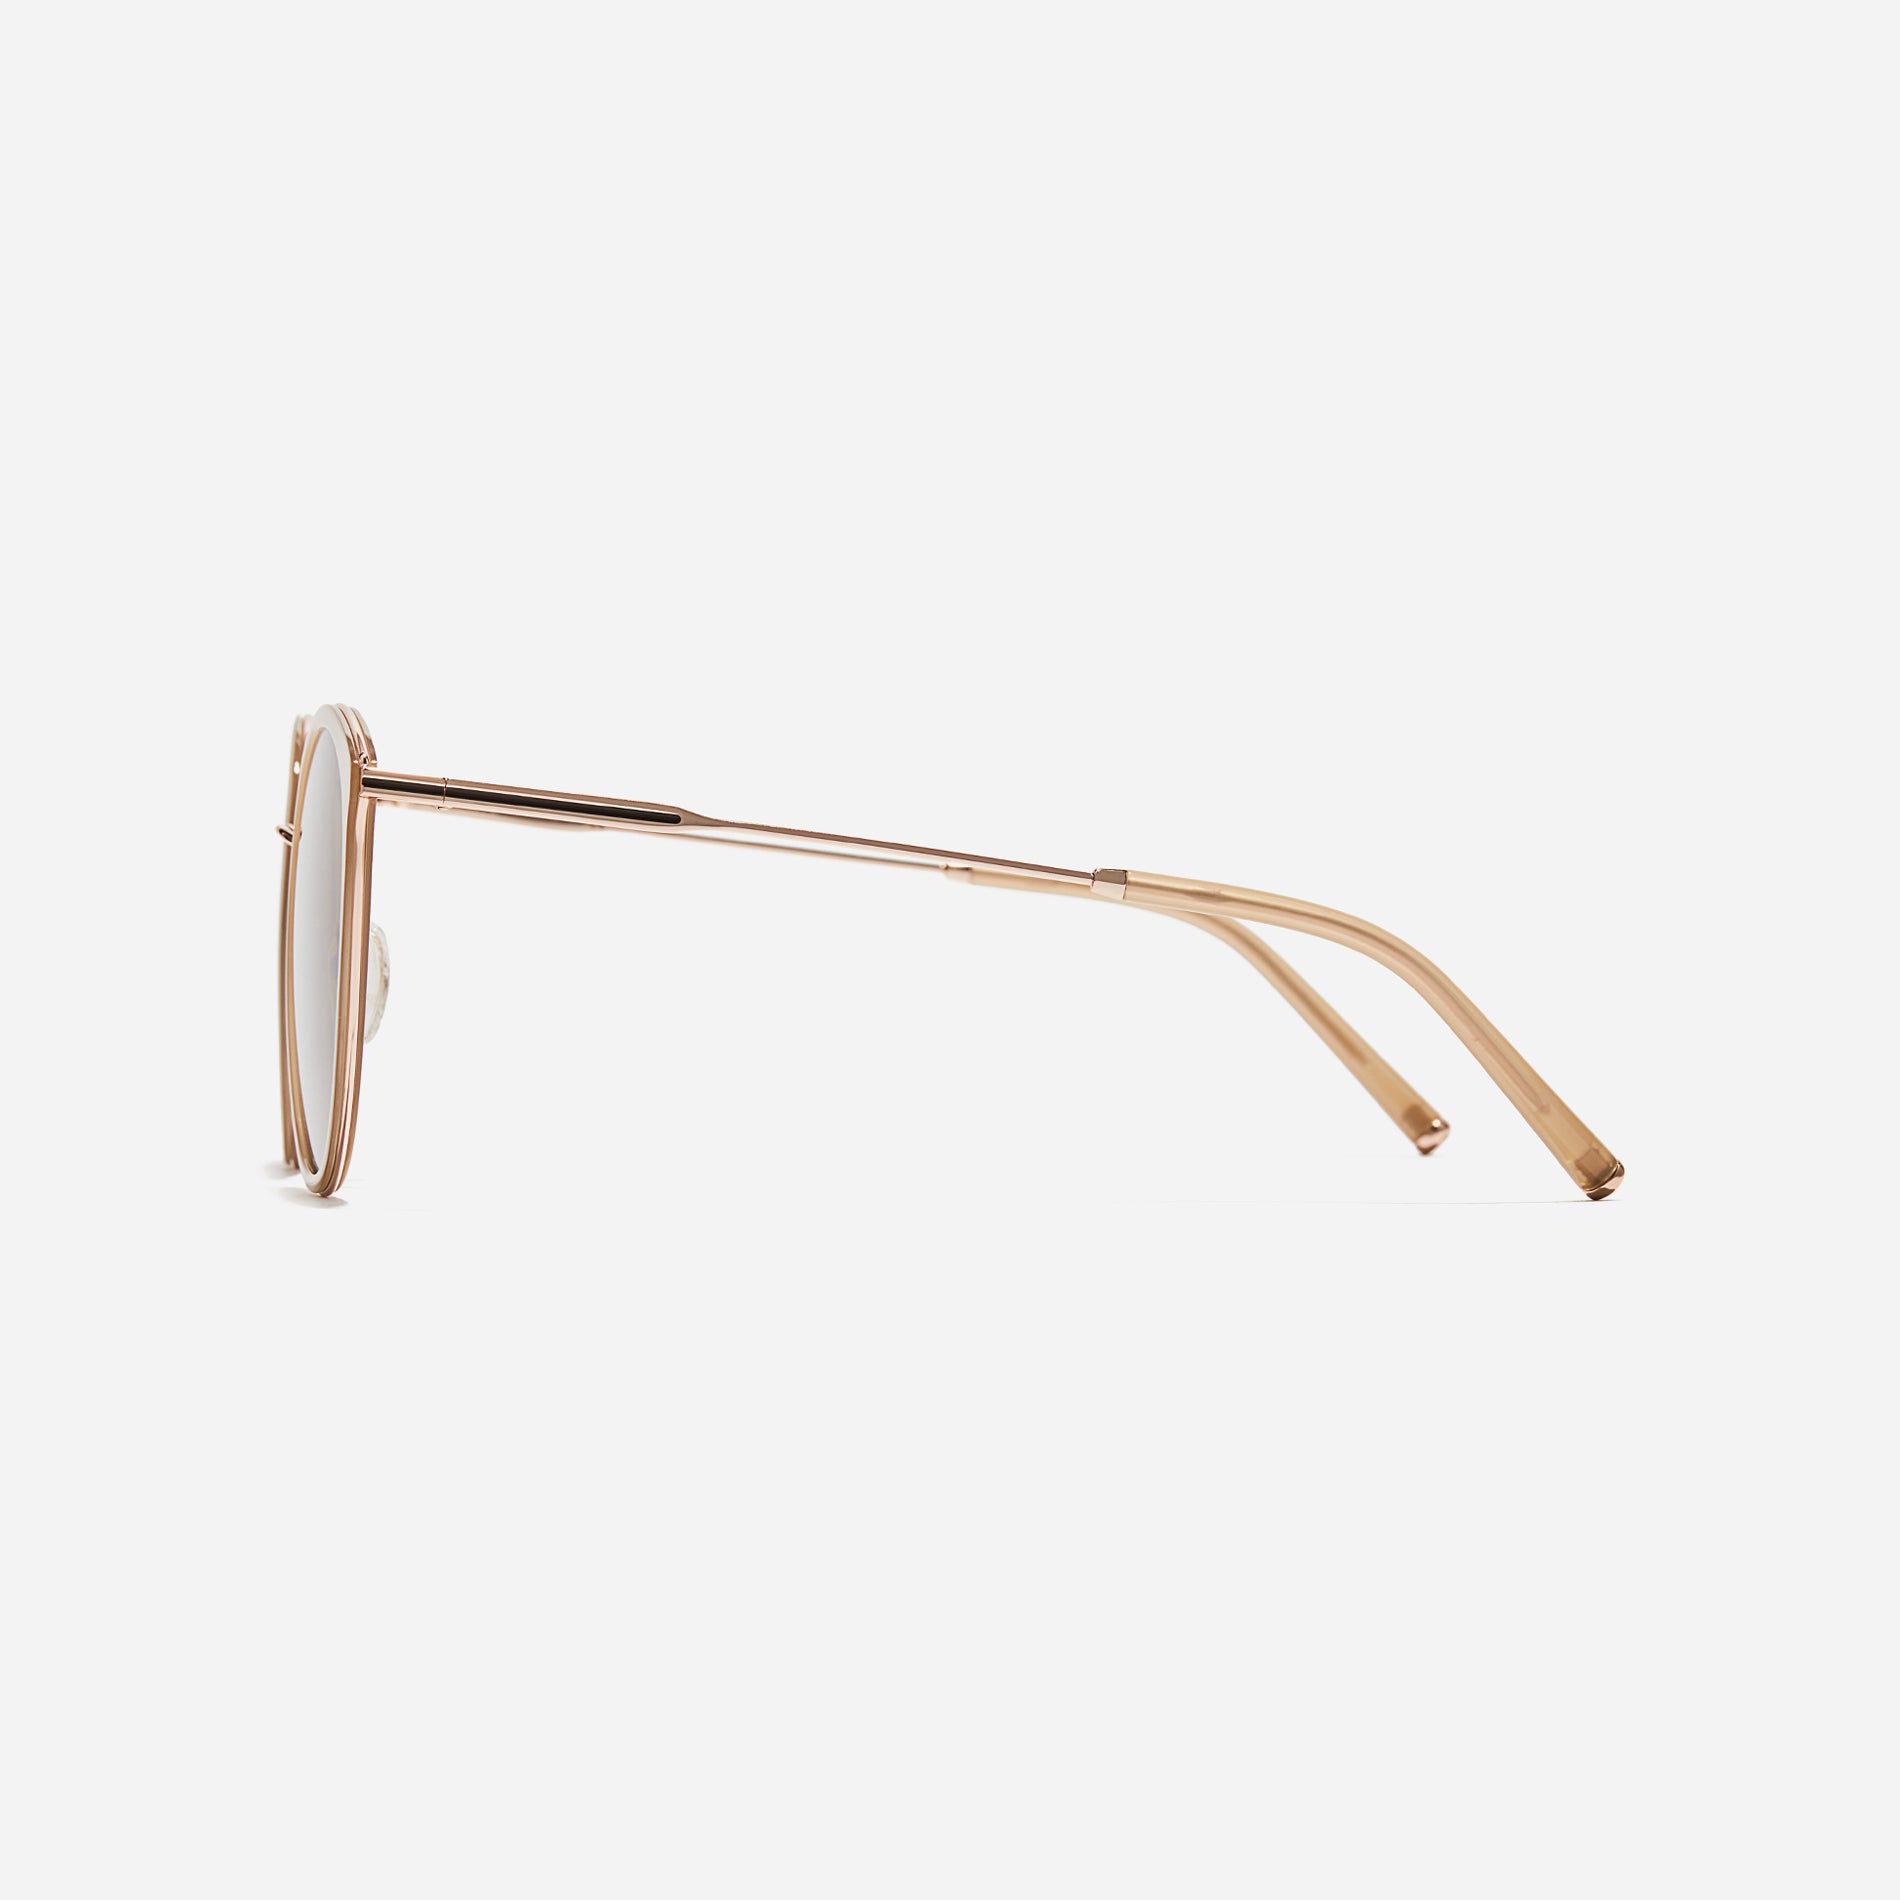 Round-shaped combination sunglasses, an enhanced version of CARIN's bestseller - Madeleine. They feature flat lenses that provide 100% UV protection and distinctive nose bridge details.